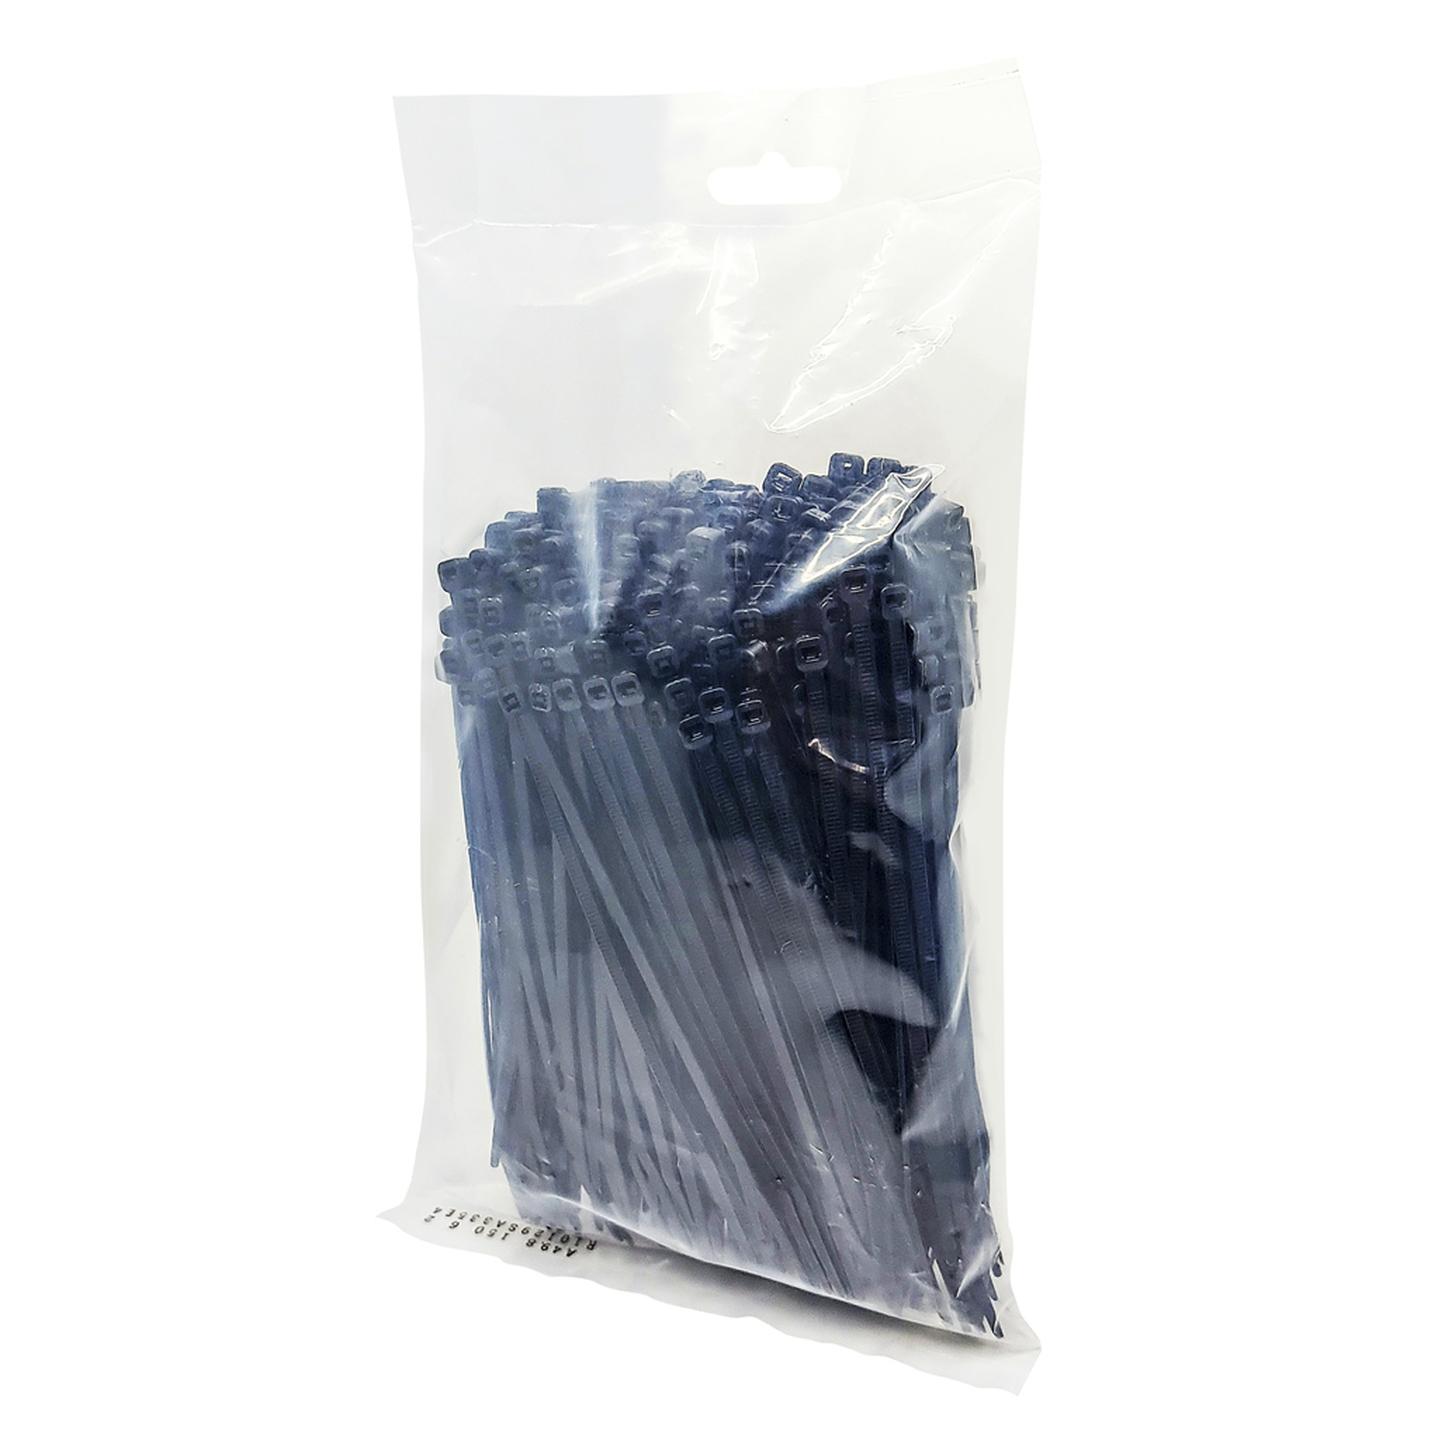 150mm Black Cable Ties - Pack of 500